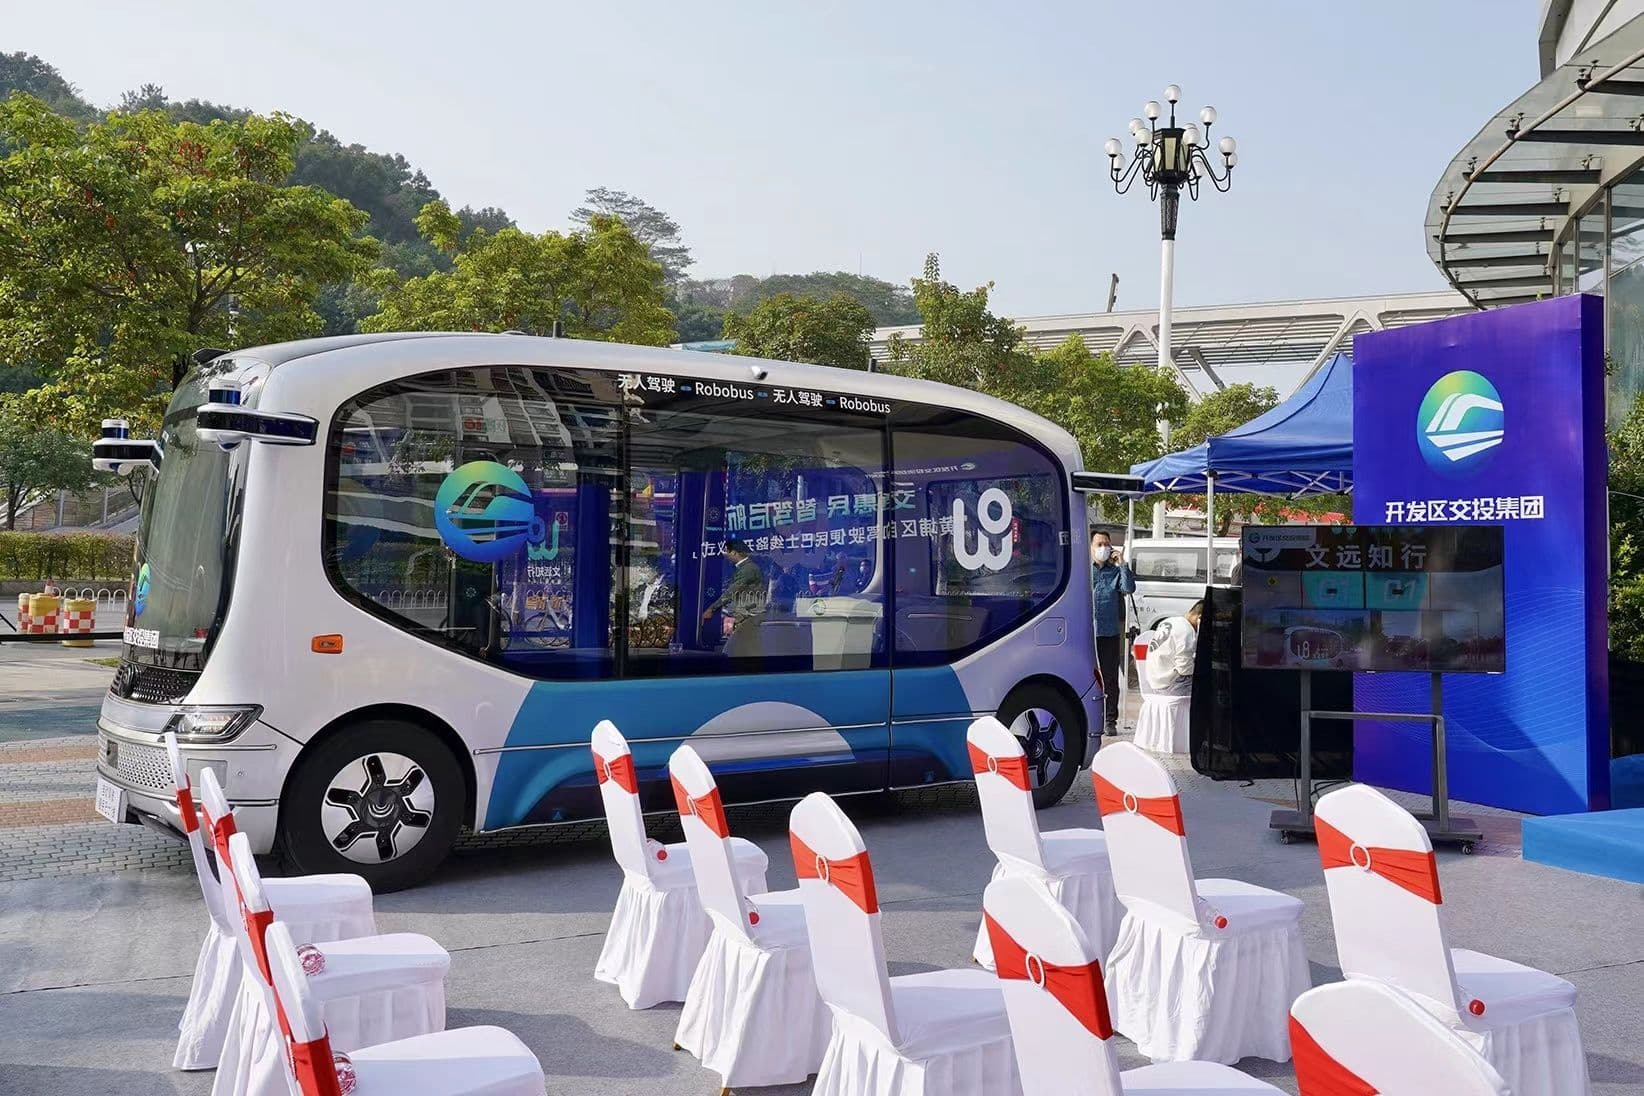 Guangzhou Huangpu District Science City opens the first self-driving convenient bus line by WeRide's Mini Robobus